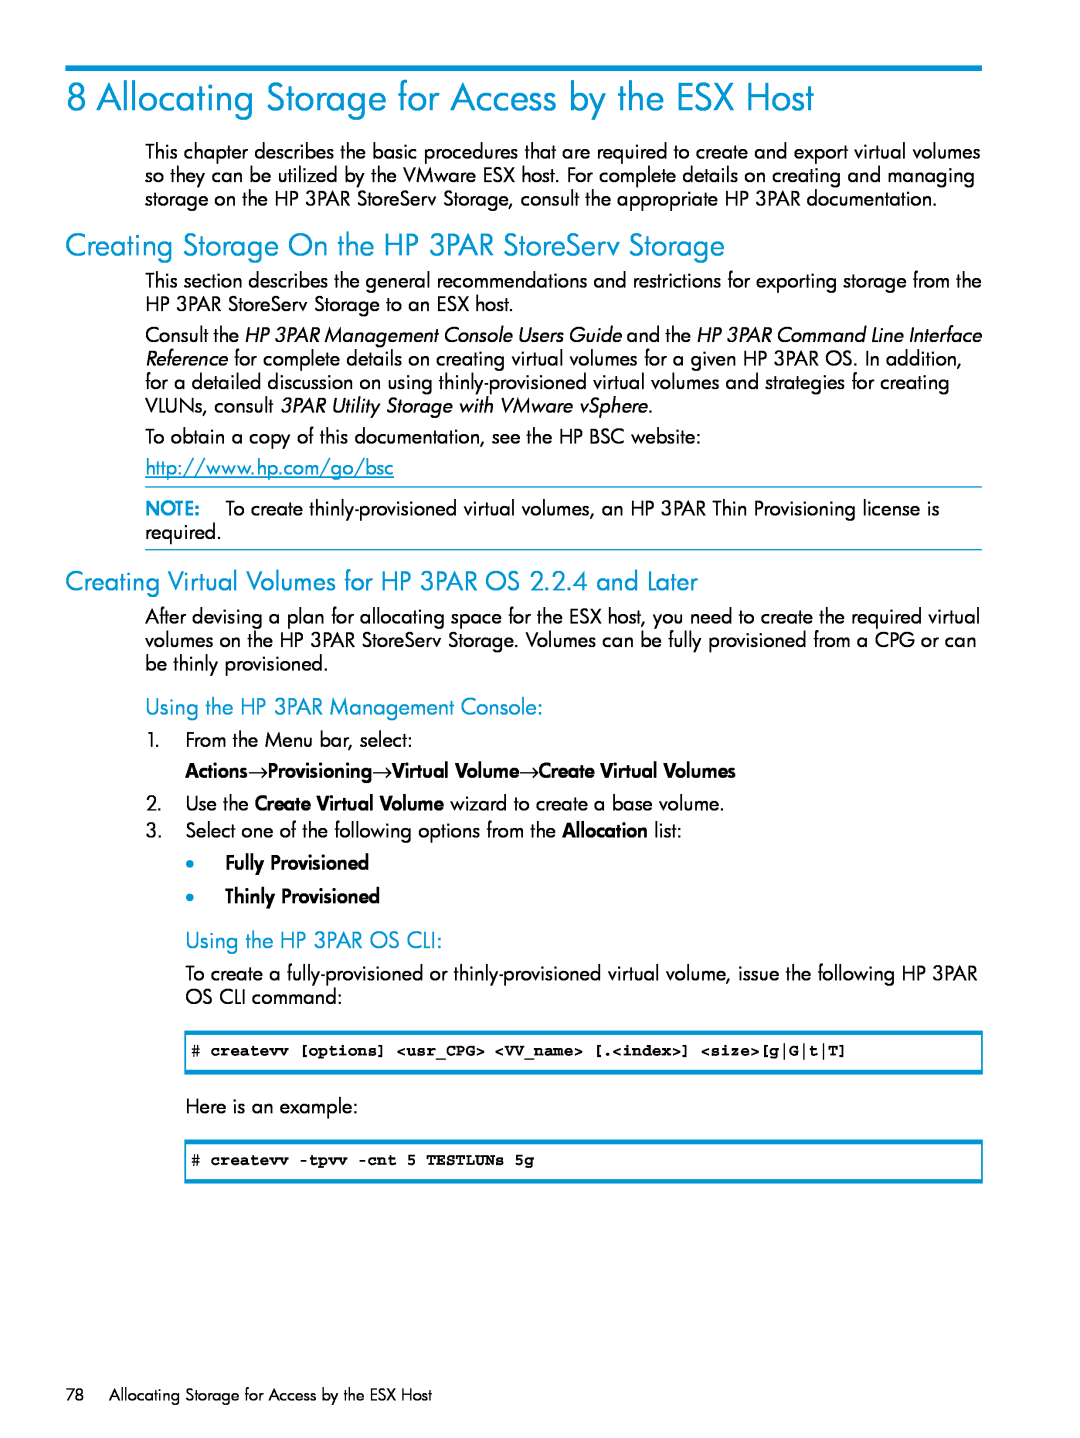 HP QR516B manual Allocating Storage for Access by the ESX Host, Creating Storage On the HP 3PAR StoreServ Storage 